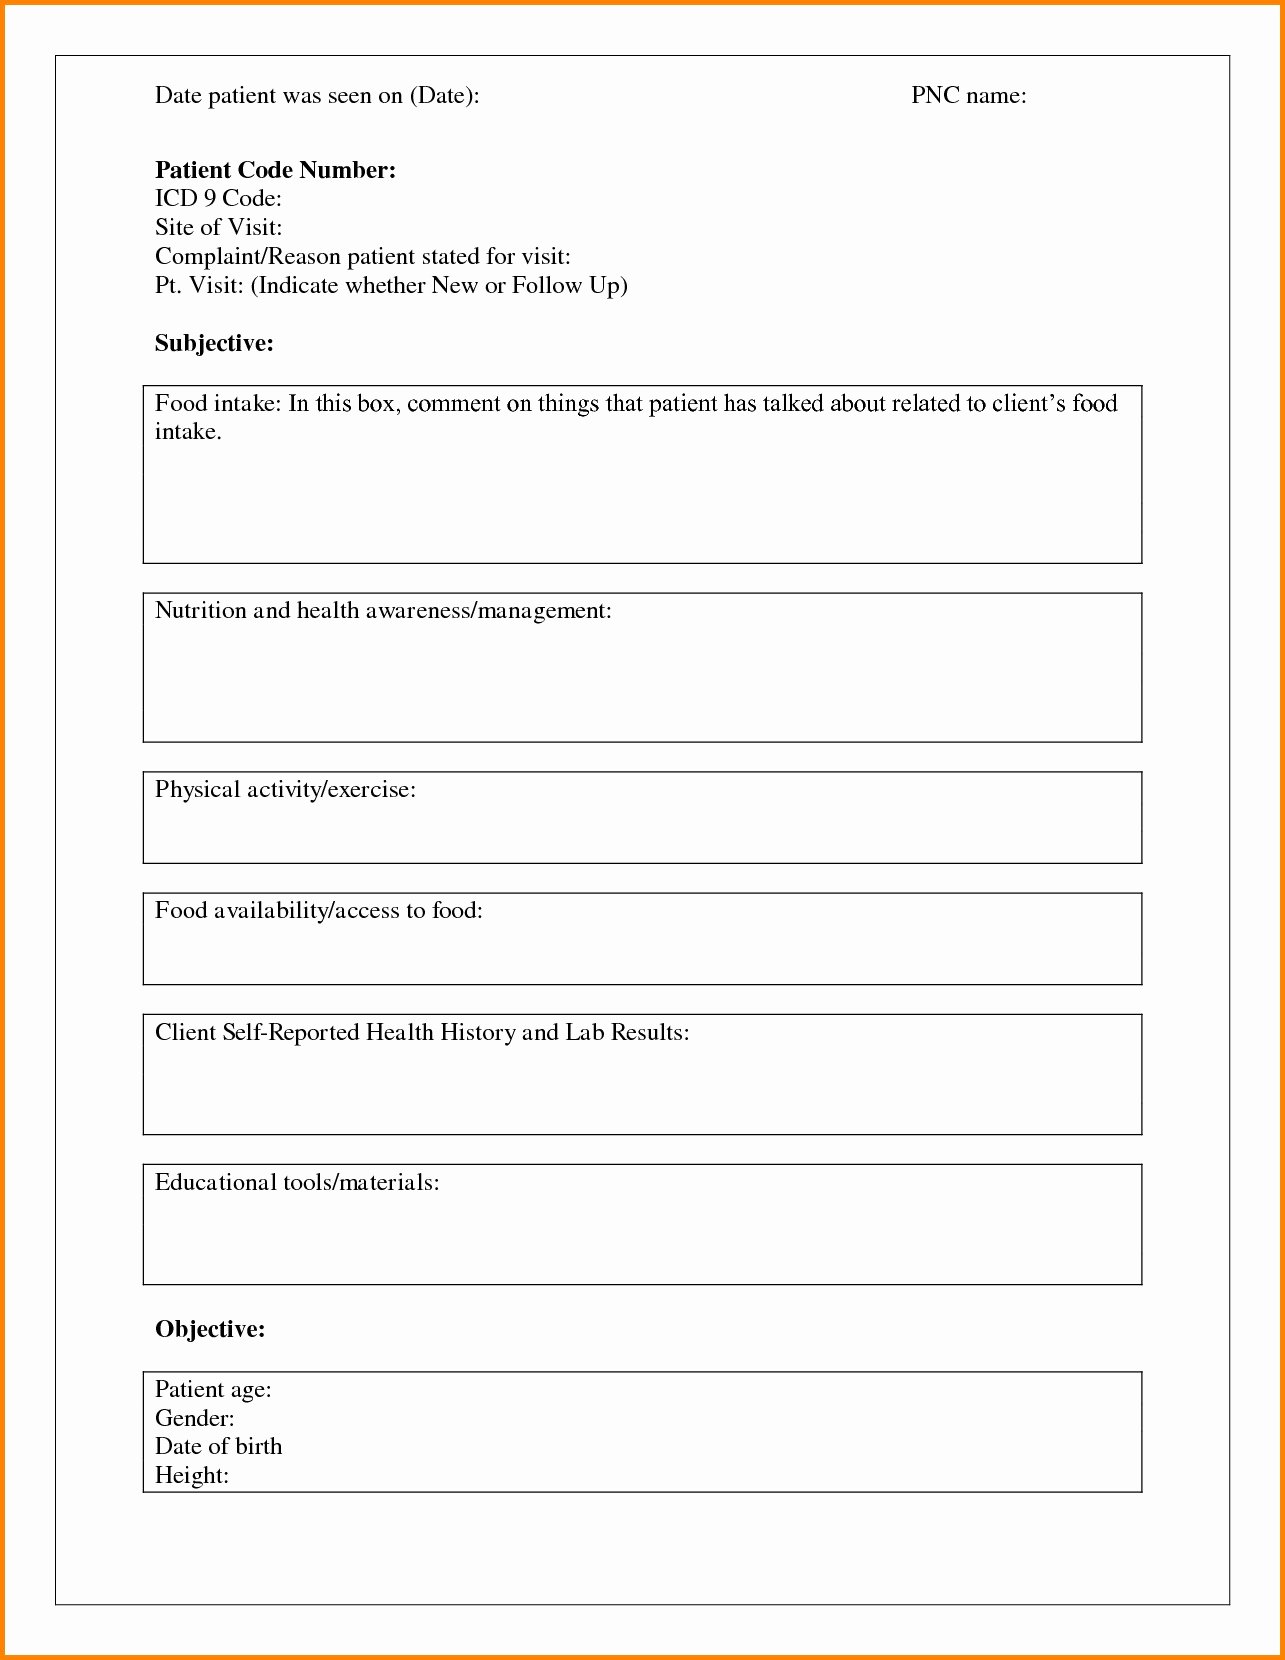 Blank soap Note Template Lovely Blank soap Note Template Word Example Resume Template